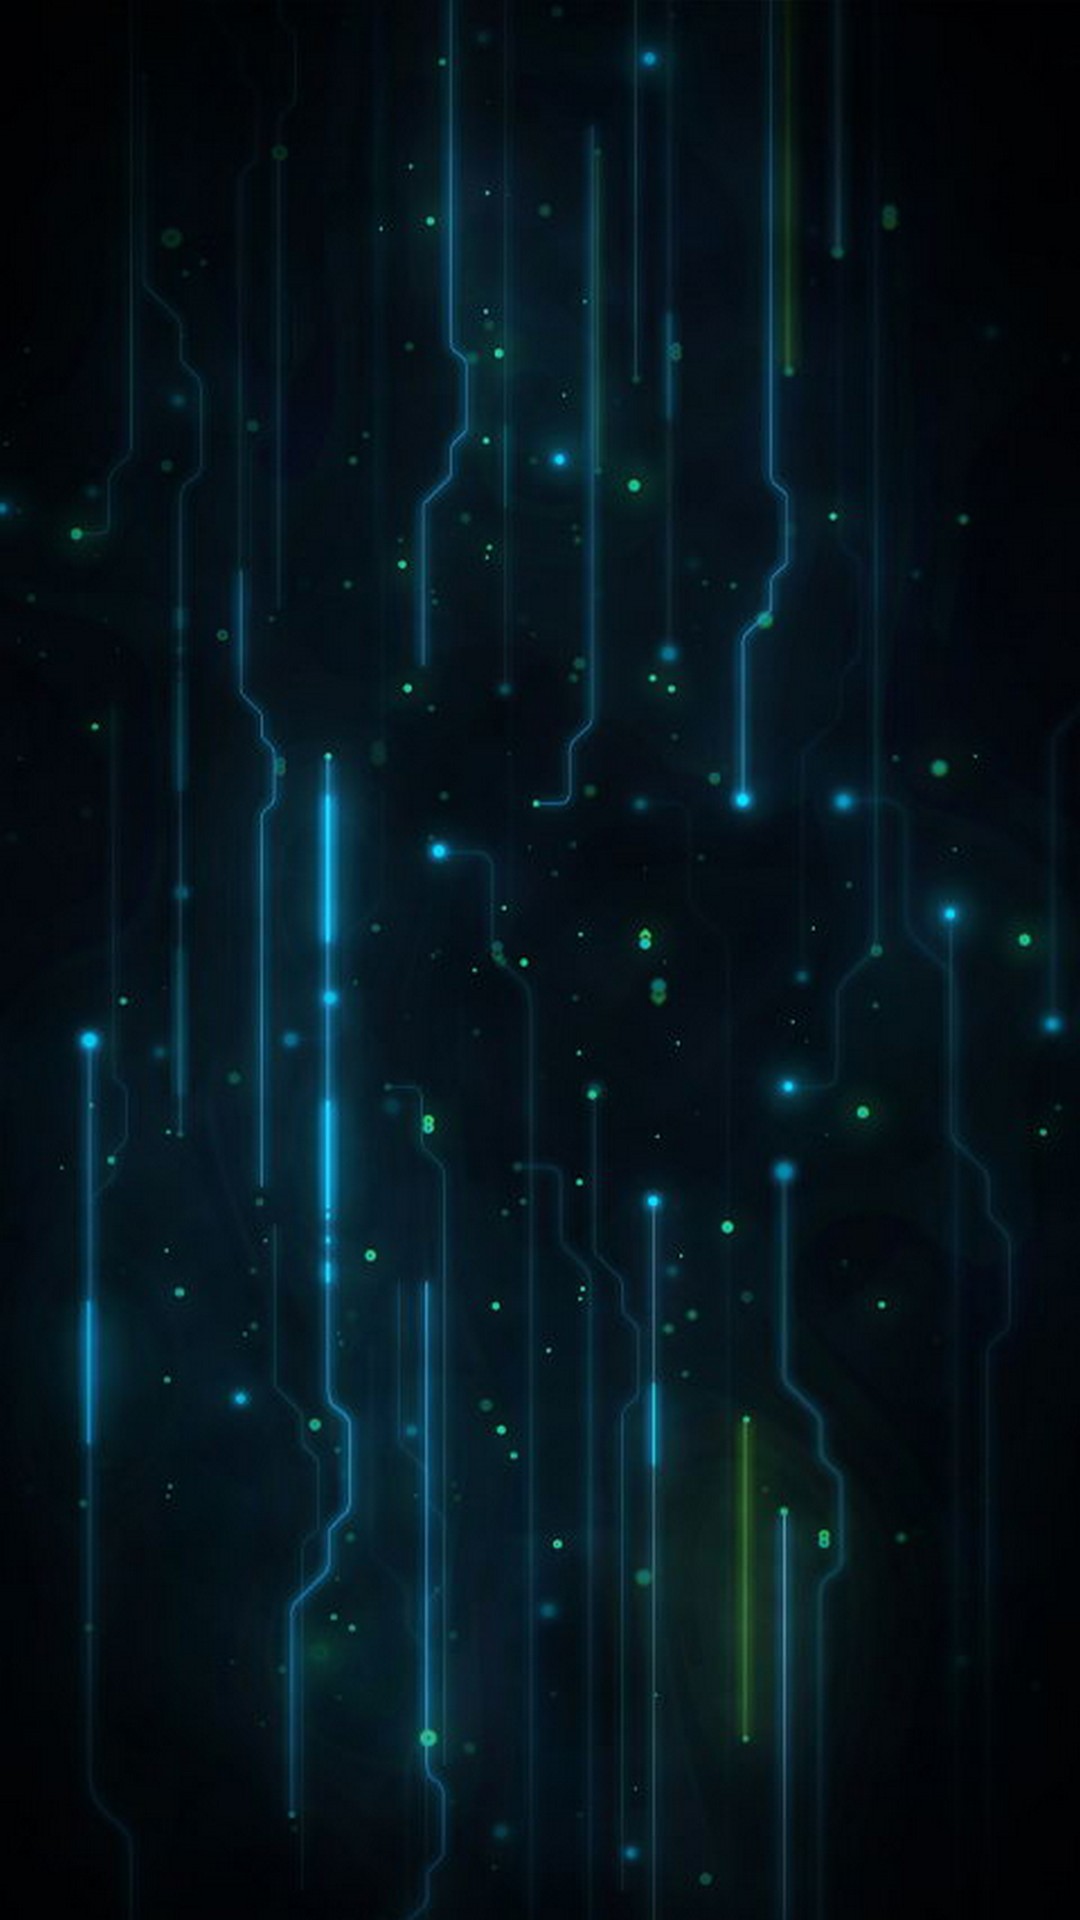 Android Wallpaper Dark Teal with image resolution 1080x1920 pixel. You can make this wallpaper for your Android backgrounds, Tablet, Smartphones Screensavers and Mobile Phone Lock Screen